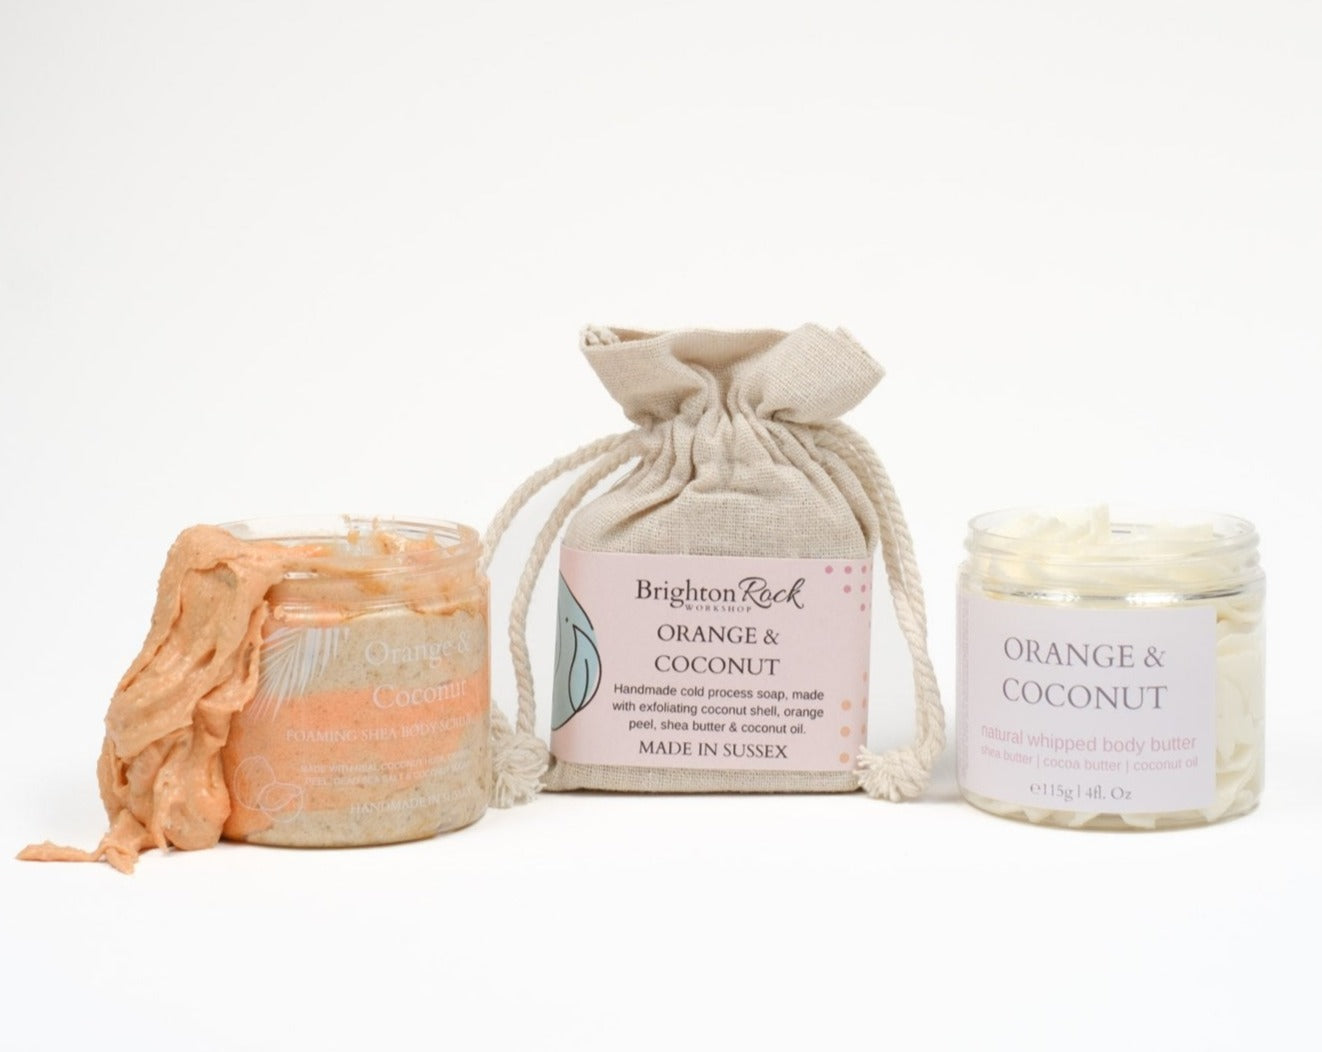 orange & coconut vegan and cruelty free skincare set. foaming shower scrub and natural whipped body butter with handmade soap - made in Brighton, UK